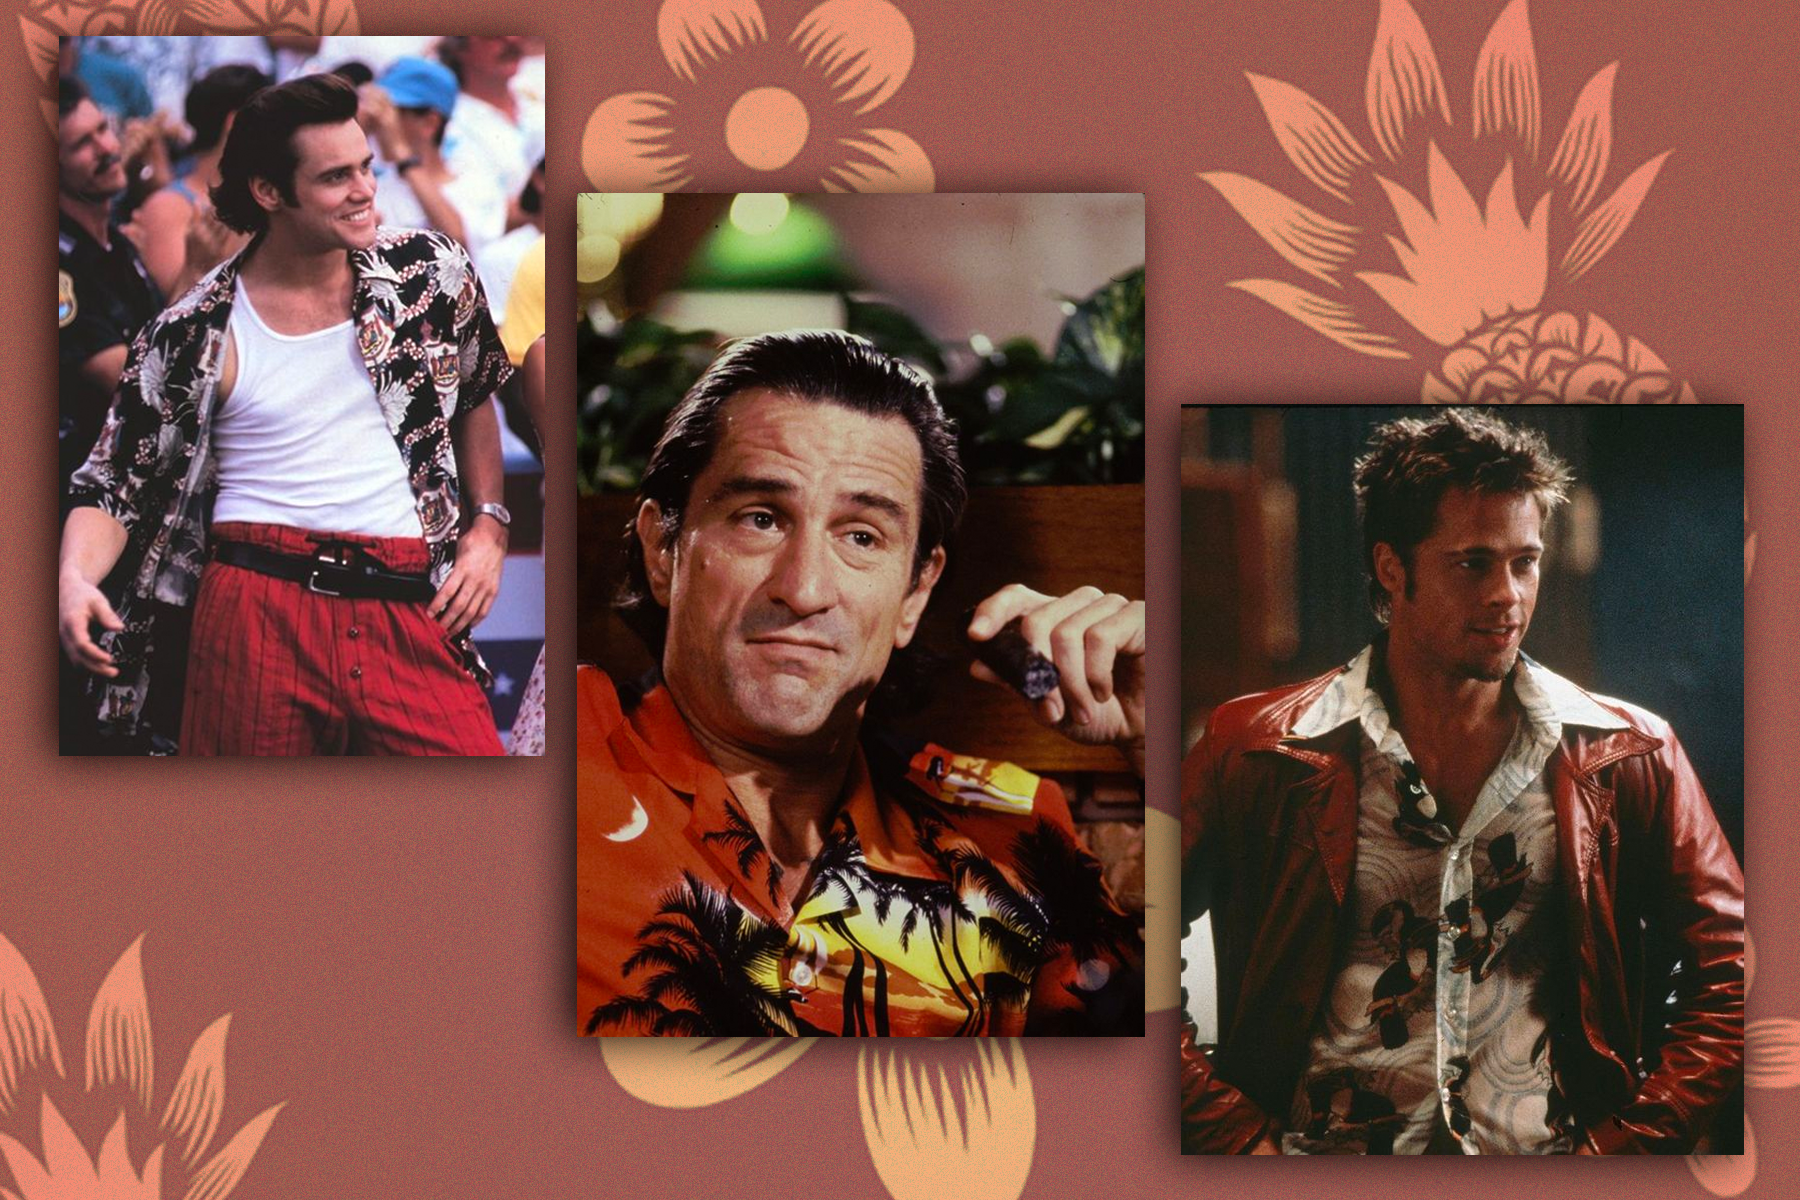 A collage of Jim Carrey from Ace Ventura, Robert DeNiro from Cape Fear, and Brad Pitt from Fight Club all wearing the Aloha shirt